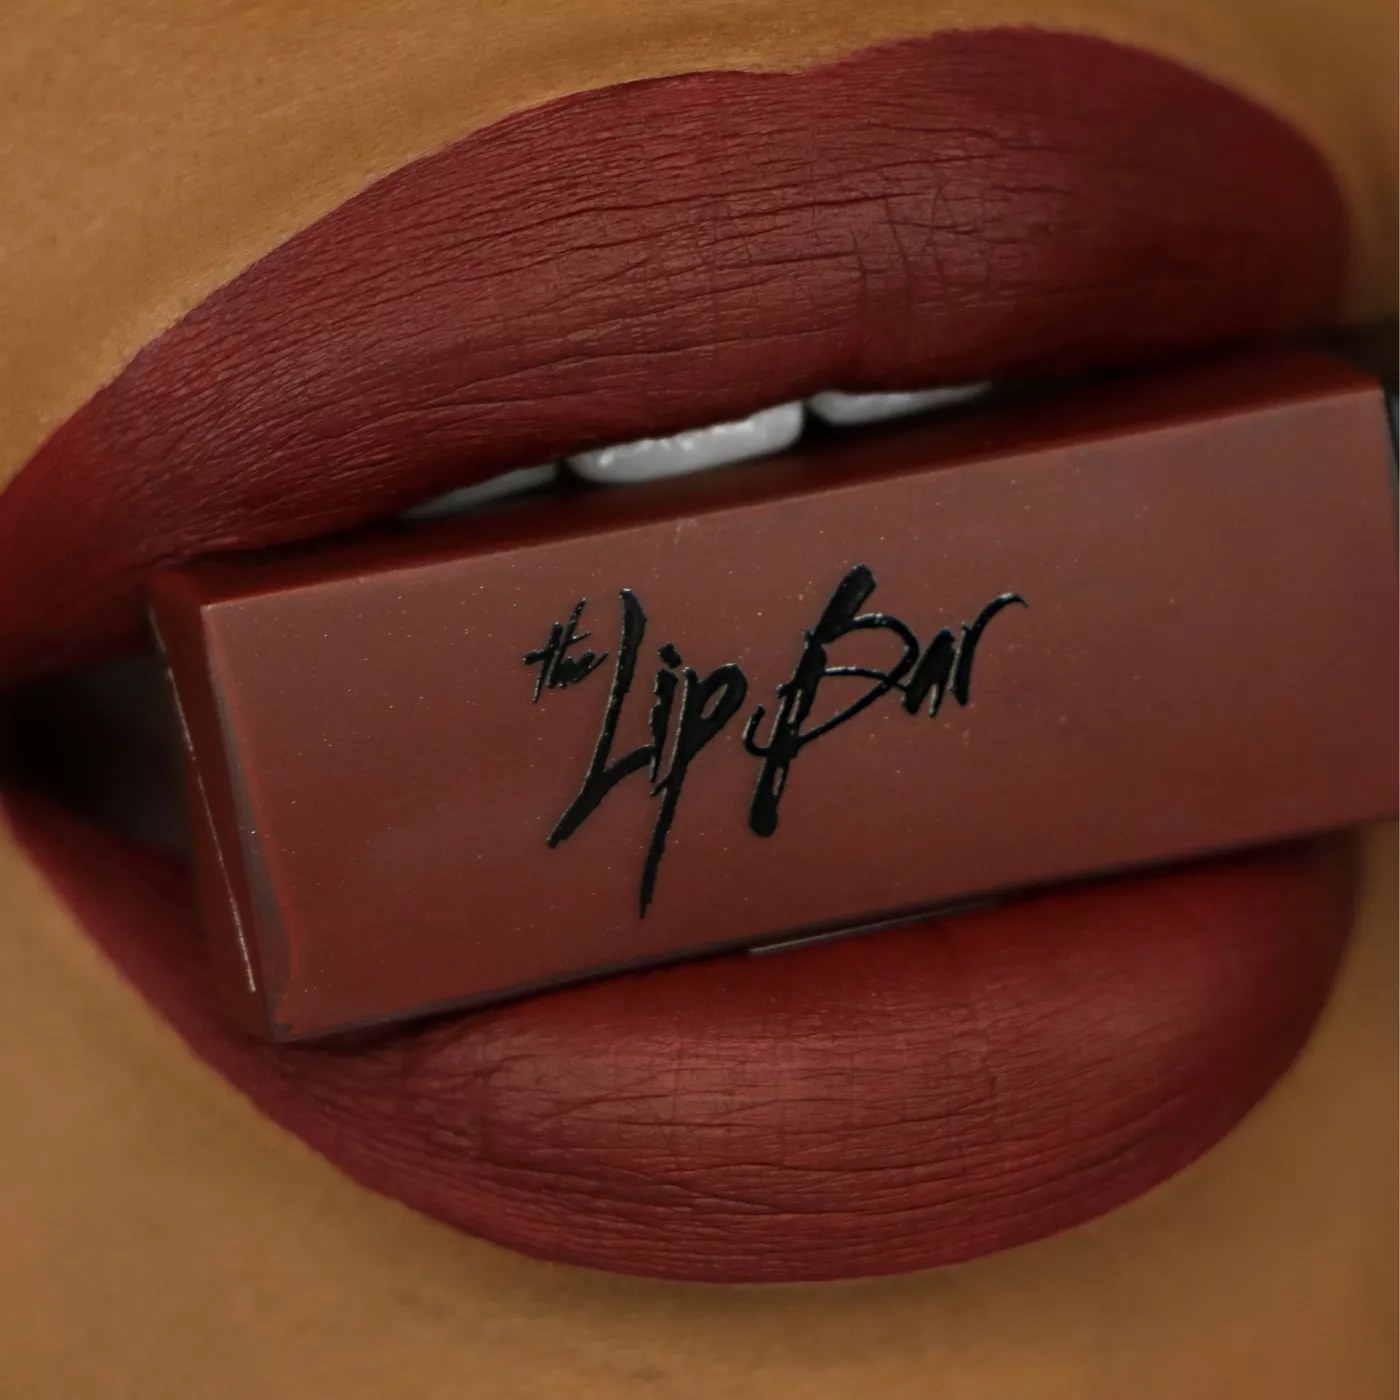 A model wearing The Lip Bar lipstick in the dark red color, &quot;Rebel&quot;